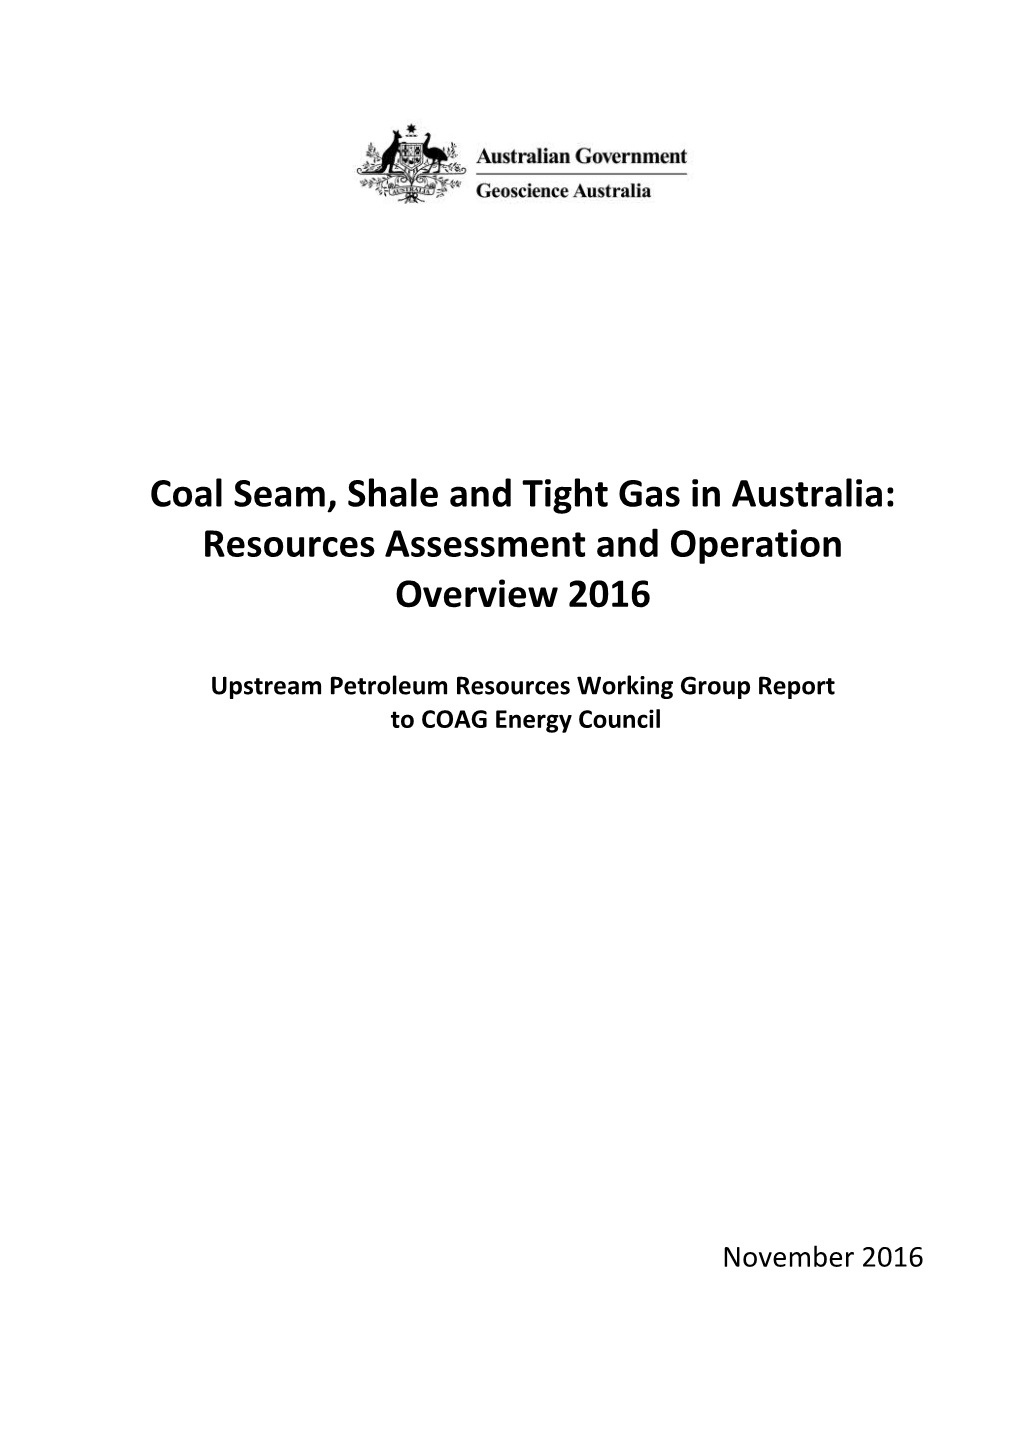 Upstream Petroleum Resources Working Group Report